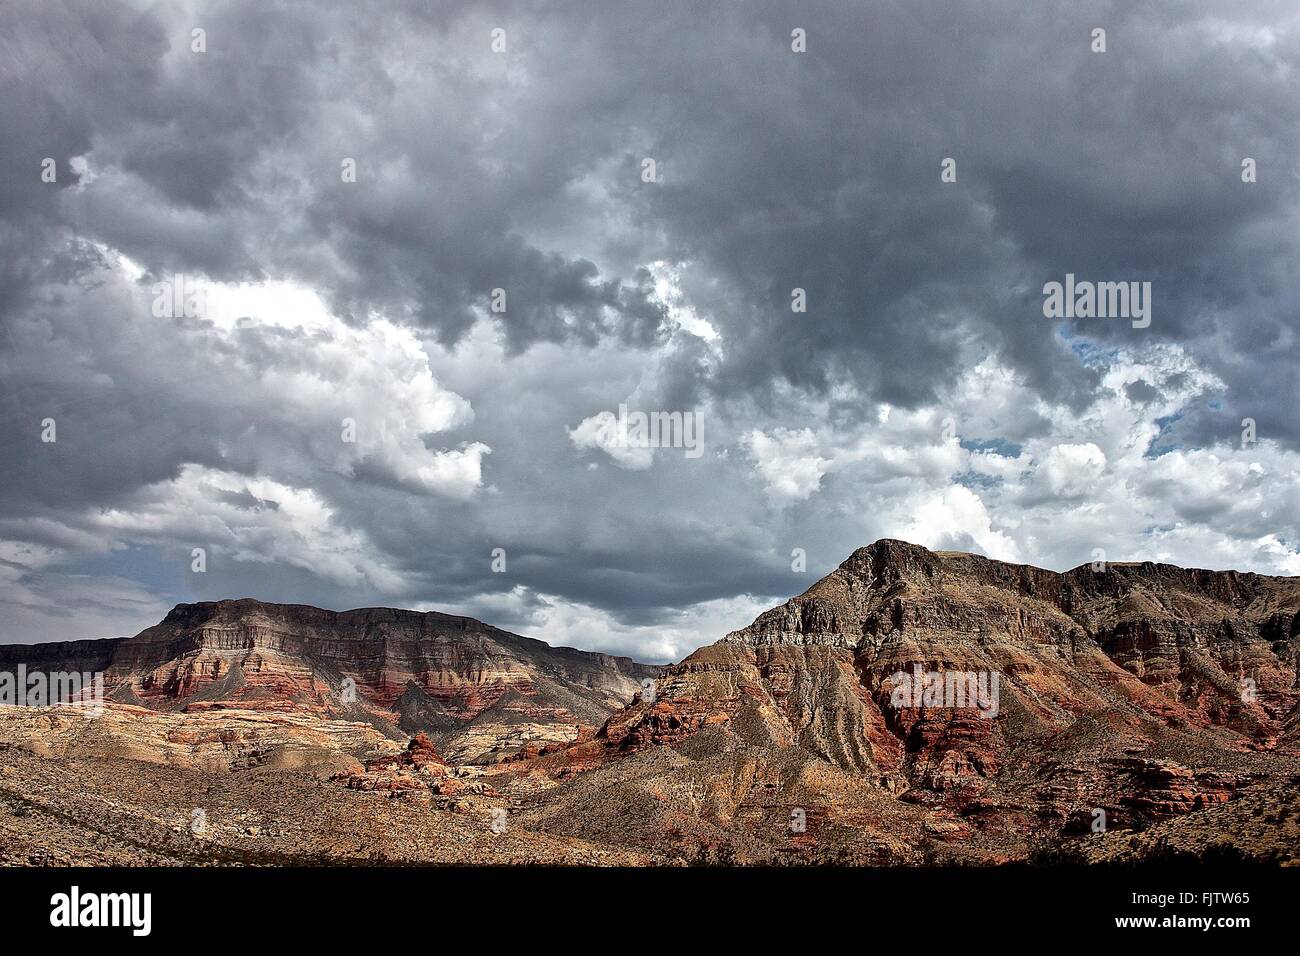 Scenic View Of Mountains Against Cloudy Sky Stock Photo